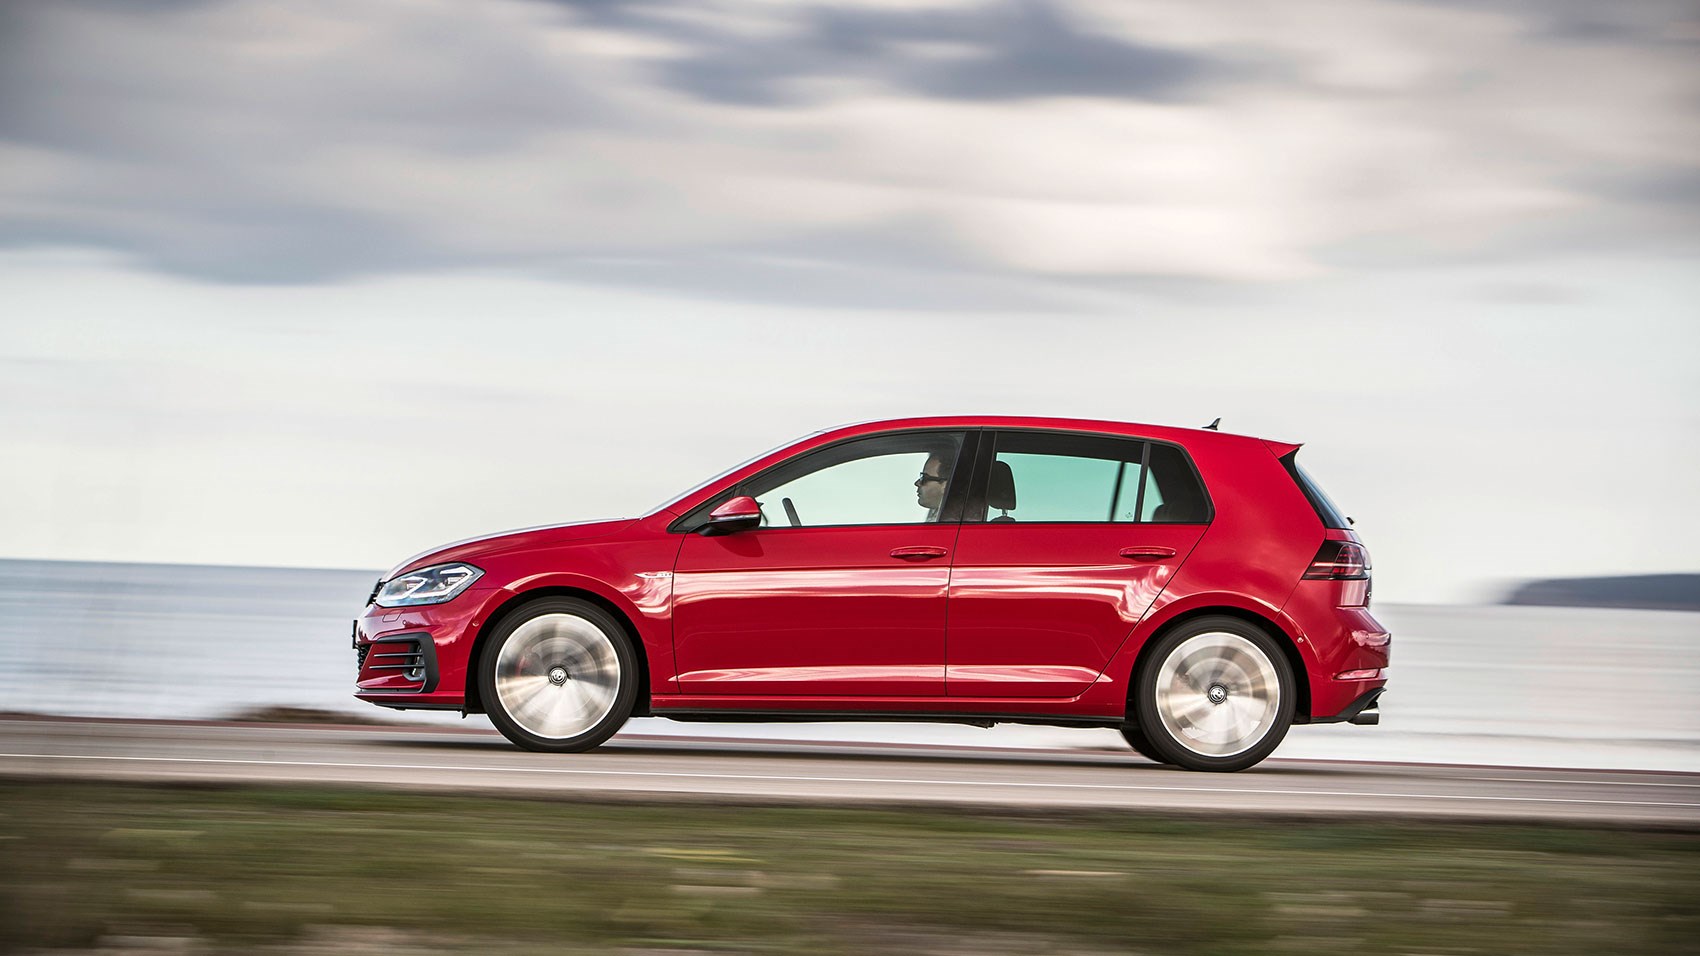 The CAR magazine VW Golf GTI review